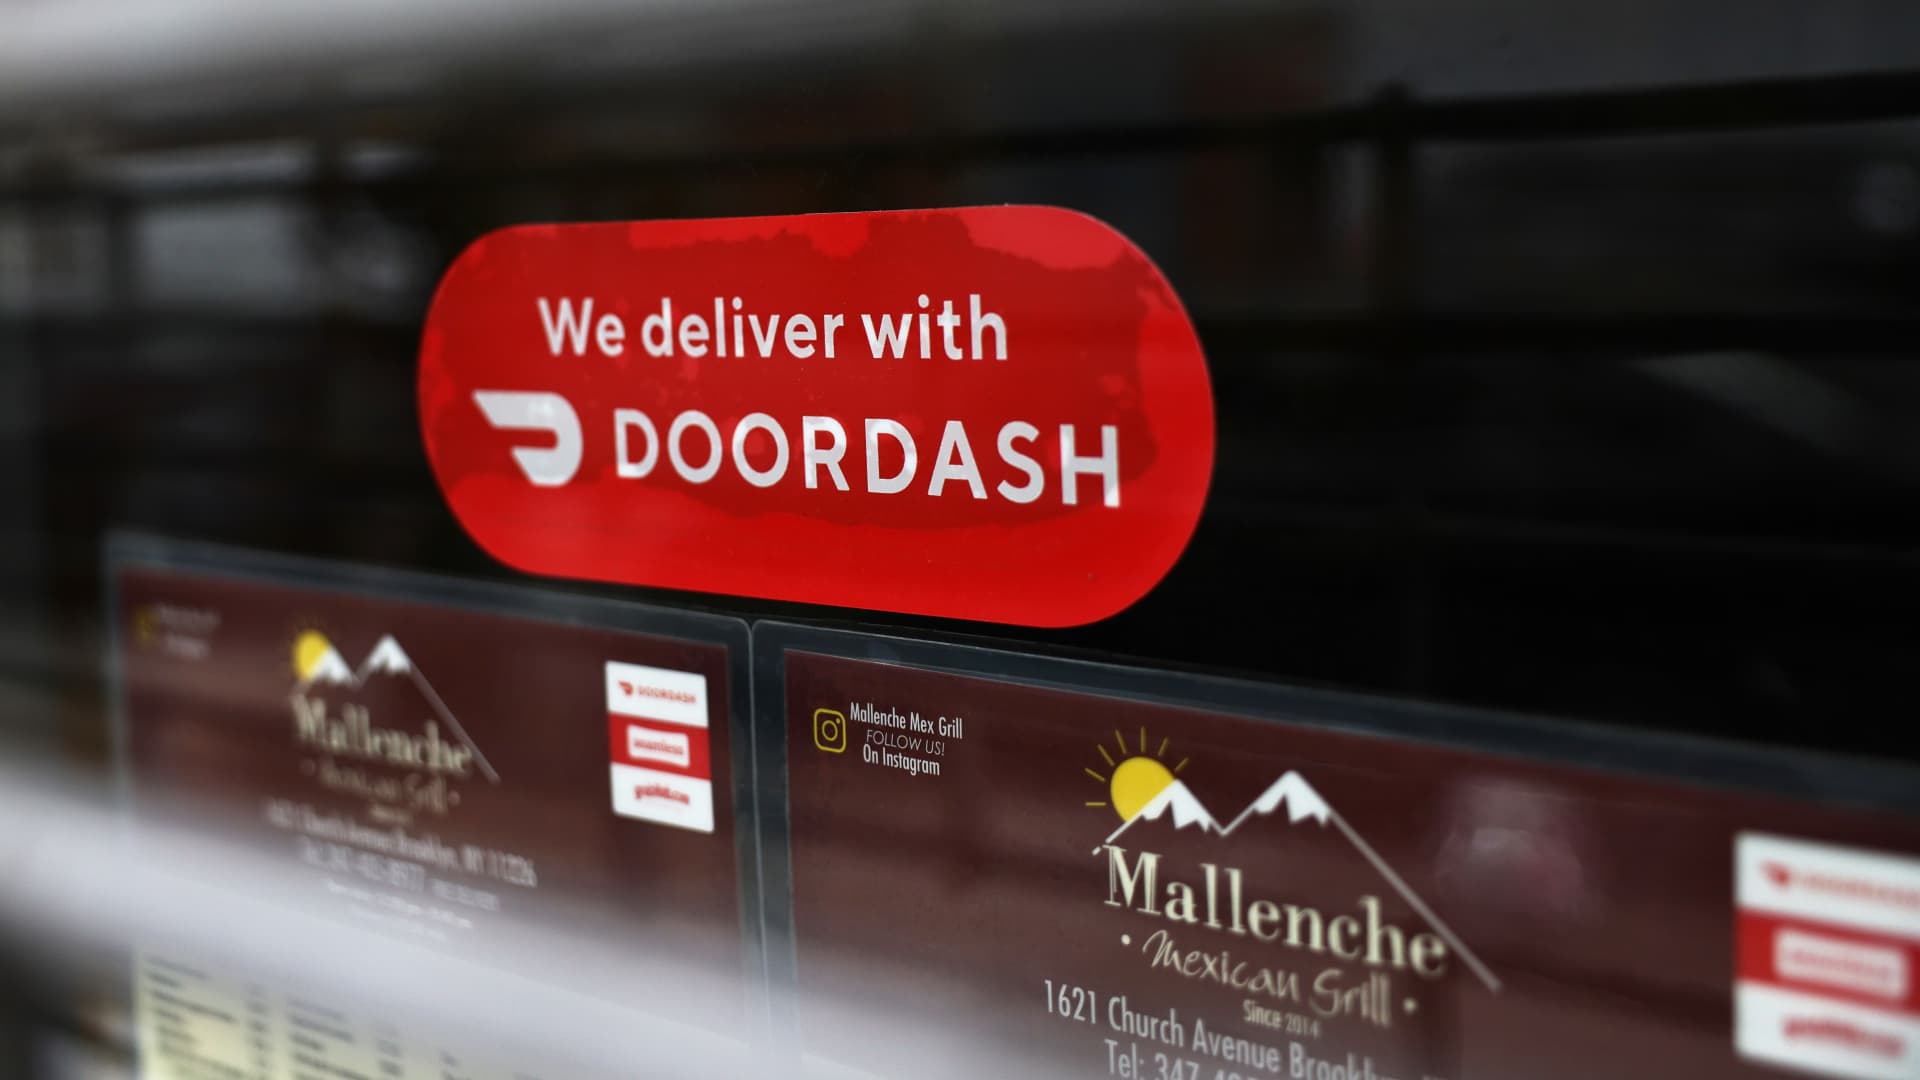 A Doordash sticker is seen on a window at Mallenche Mexican Grill in the Flatbush neighborhood of Brooklyn on December 04, 2020 in New York City. Food delivery startup DoorDash Inc is expected to raise its U.S. initial public offering up to $3.14 billion.